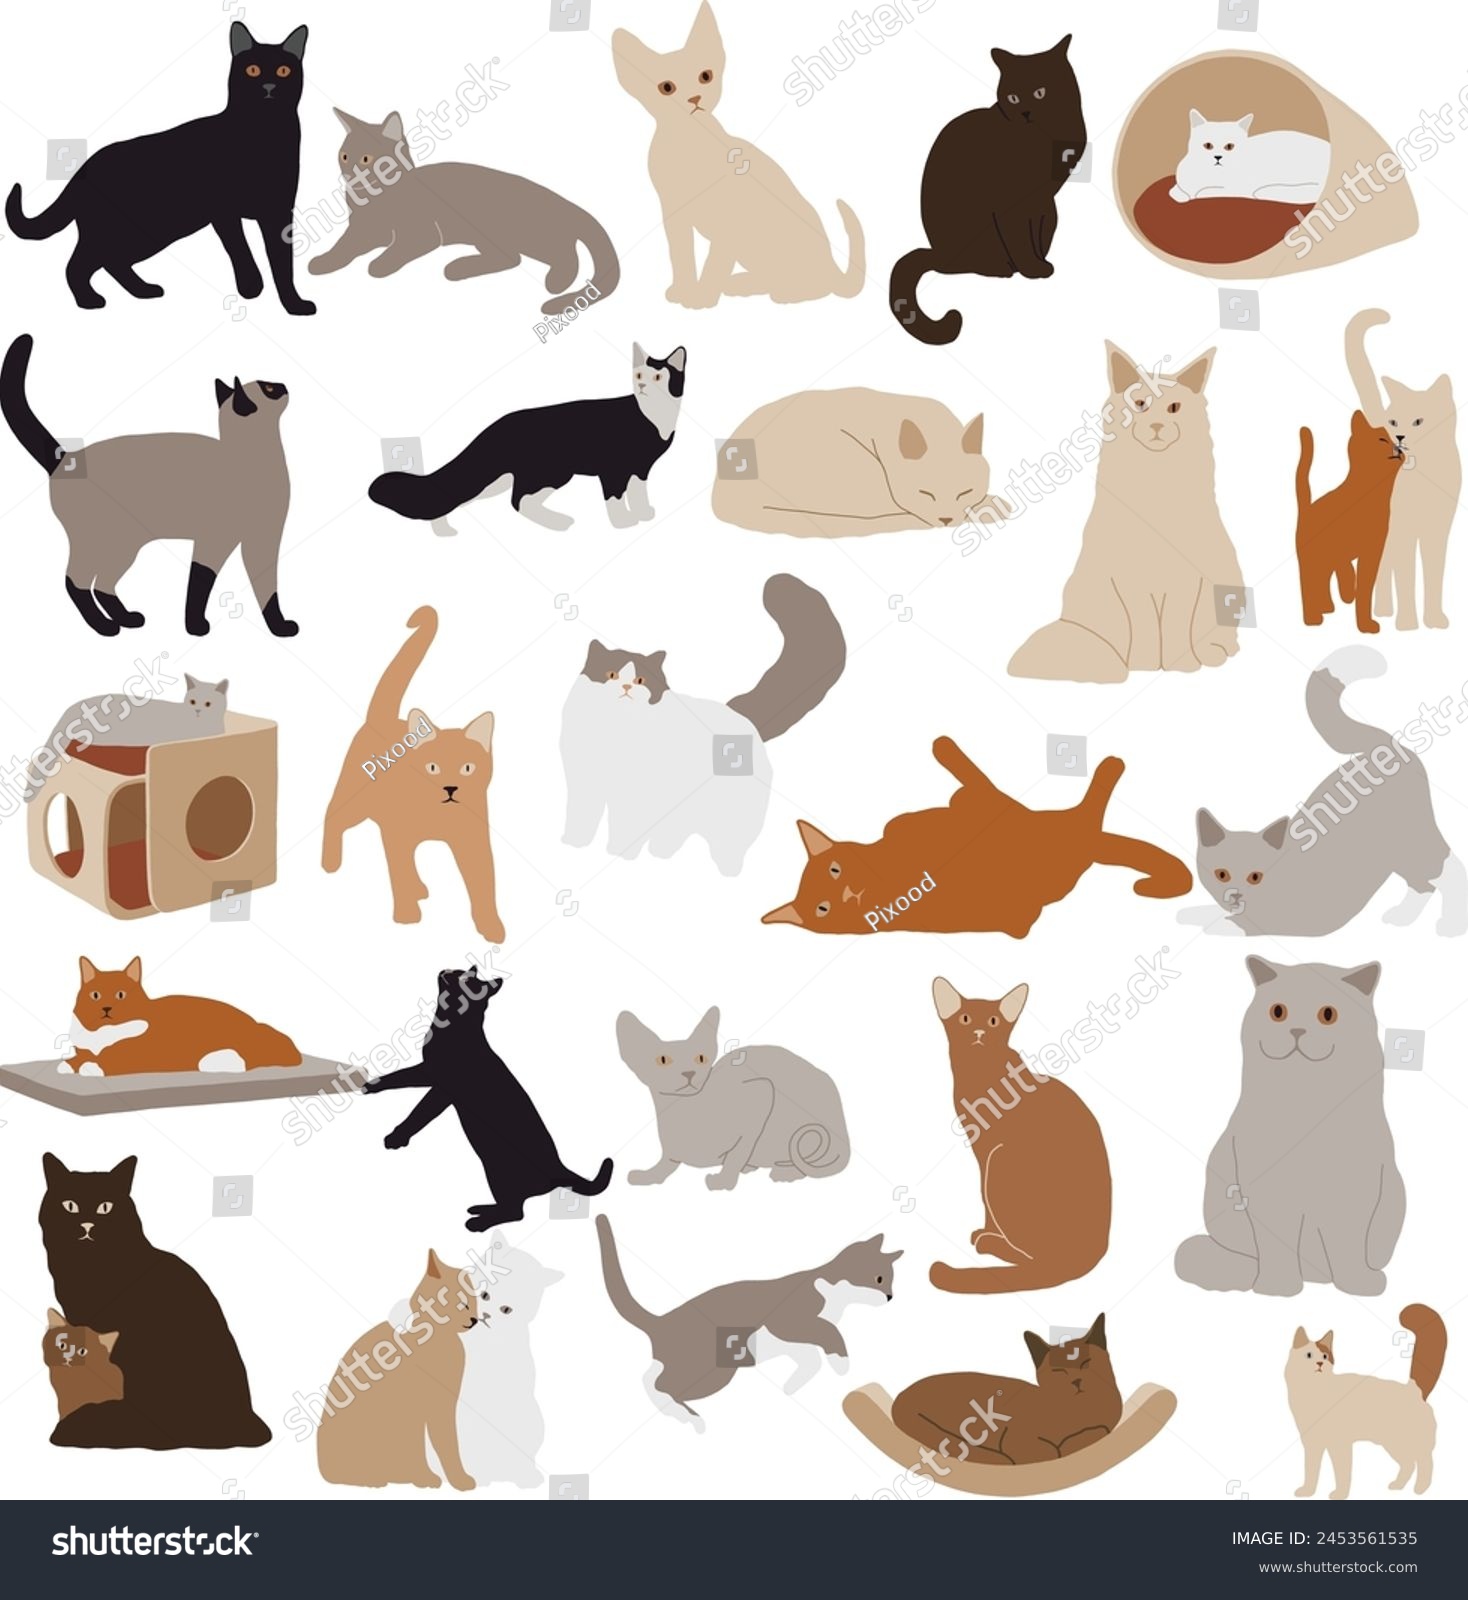 SVG of cute kittens to majestic cats, our high-quality illustrations capture the grace, curiosity, and personality of these beloved pets.  svg